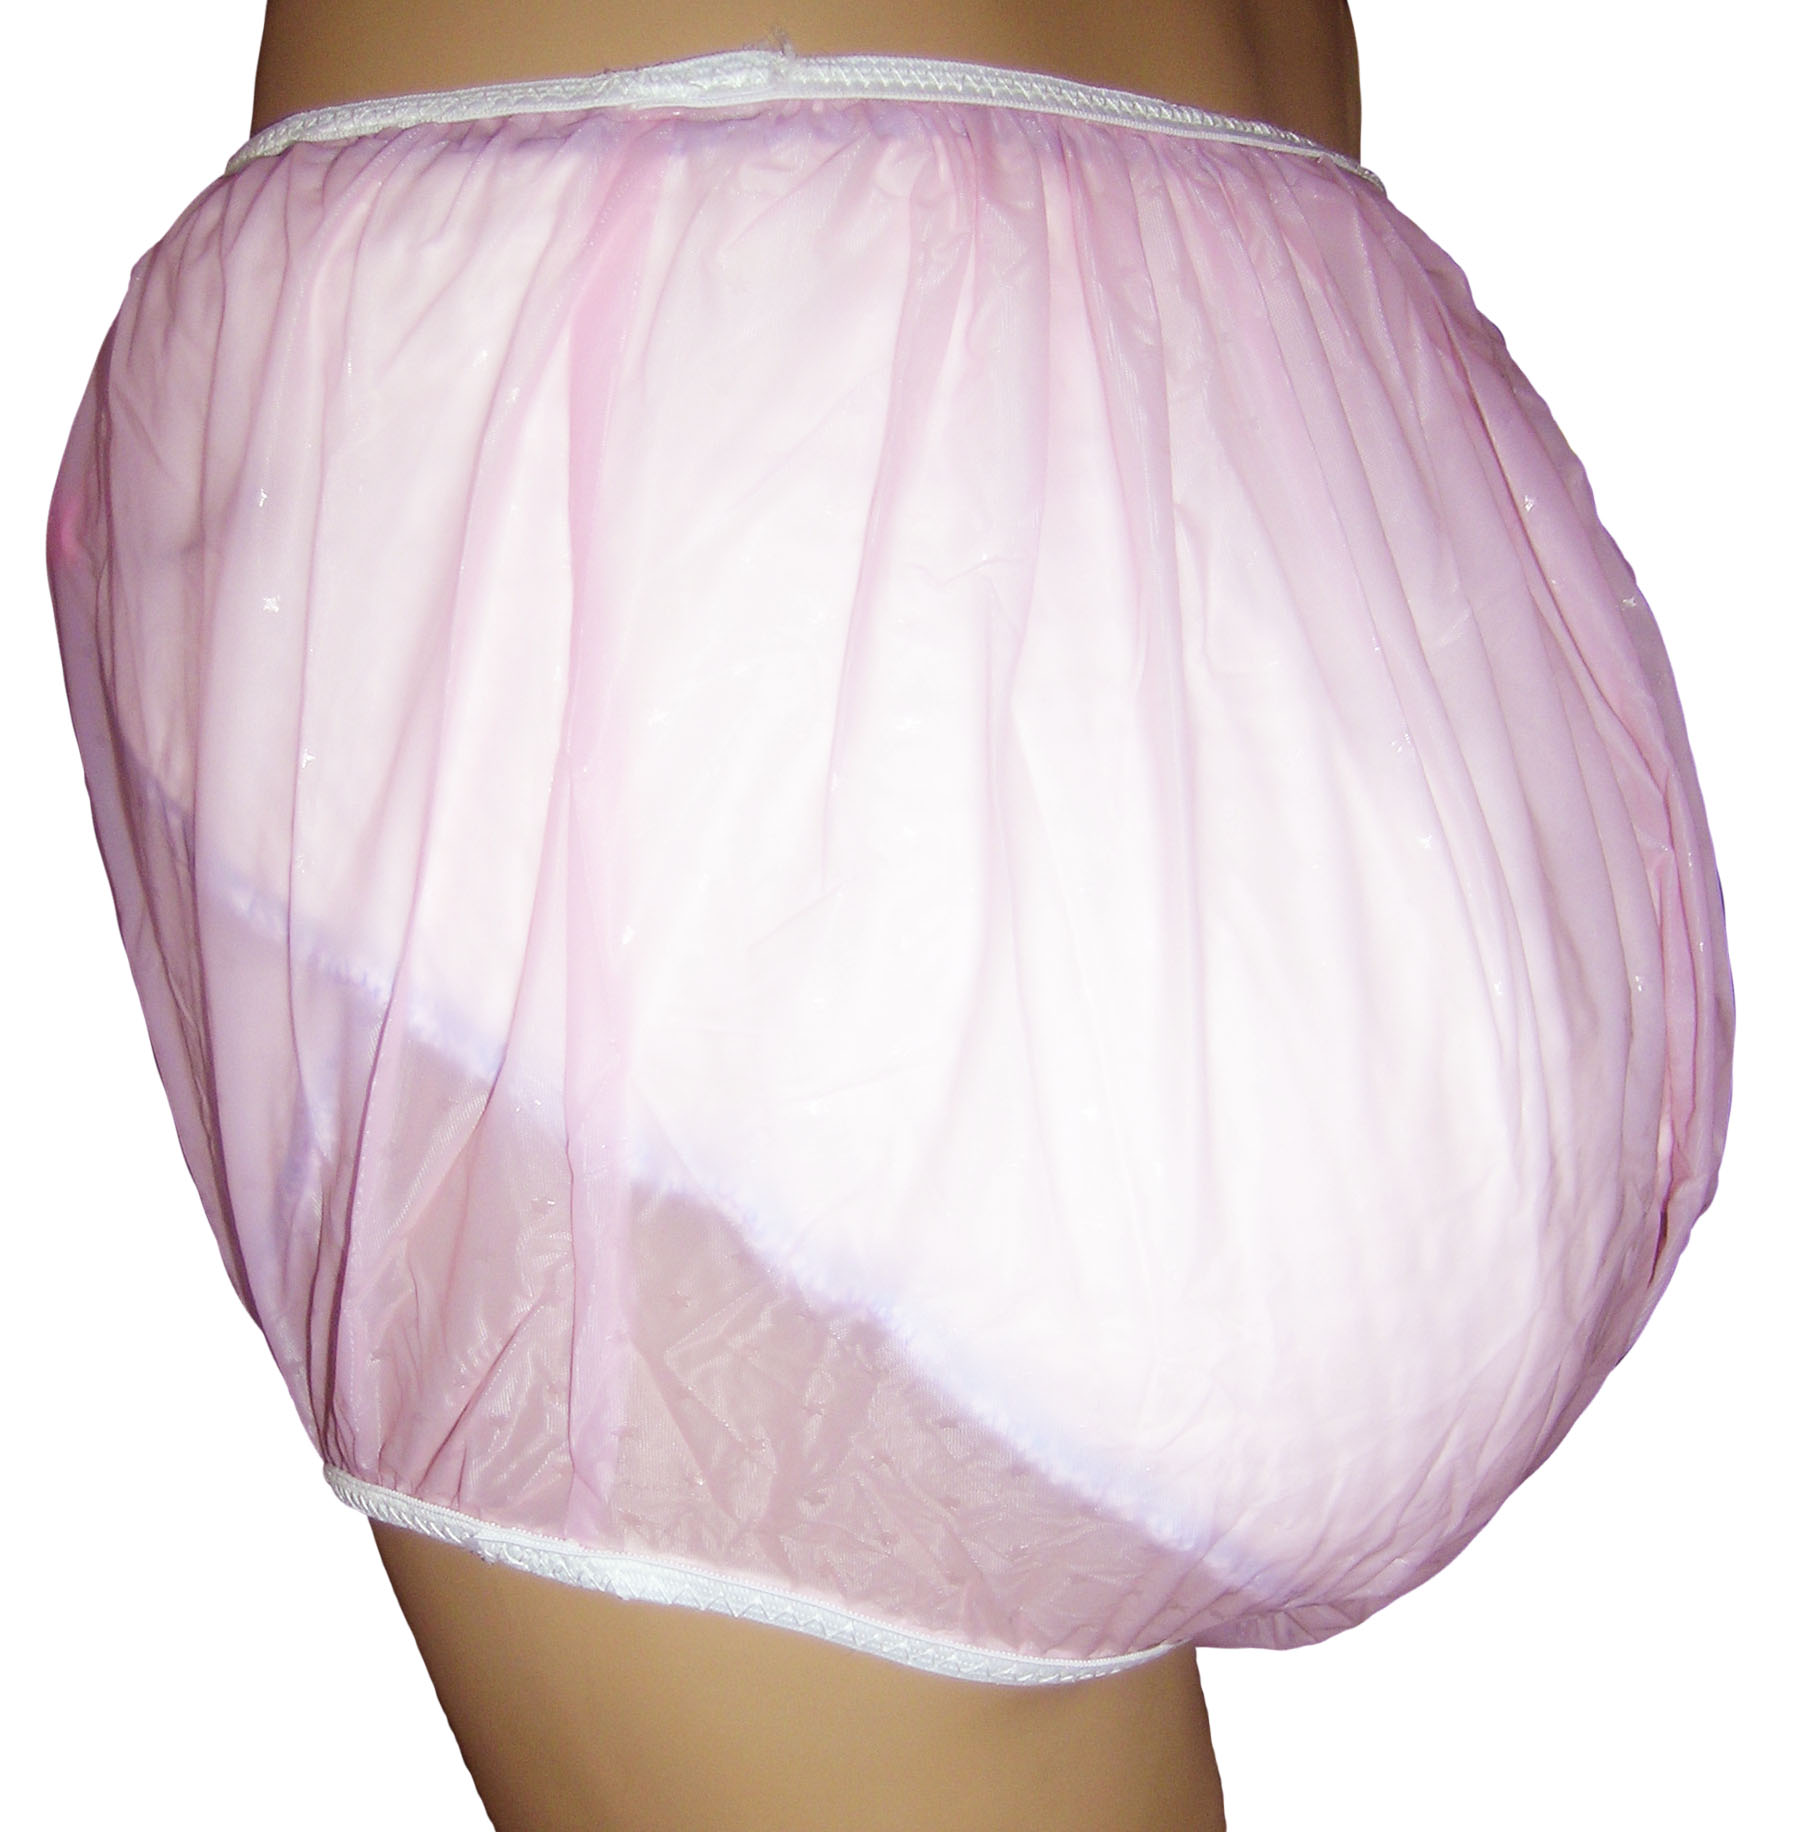 Adult Baby Cream PLASTIC PANTS. Side Snaps to Open at Front. Soft